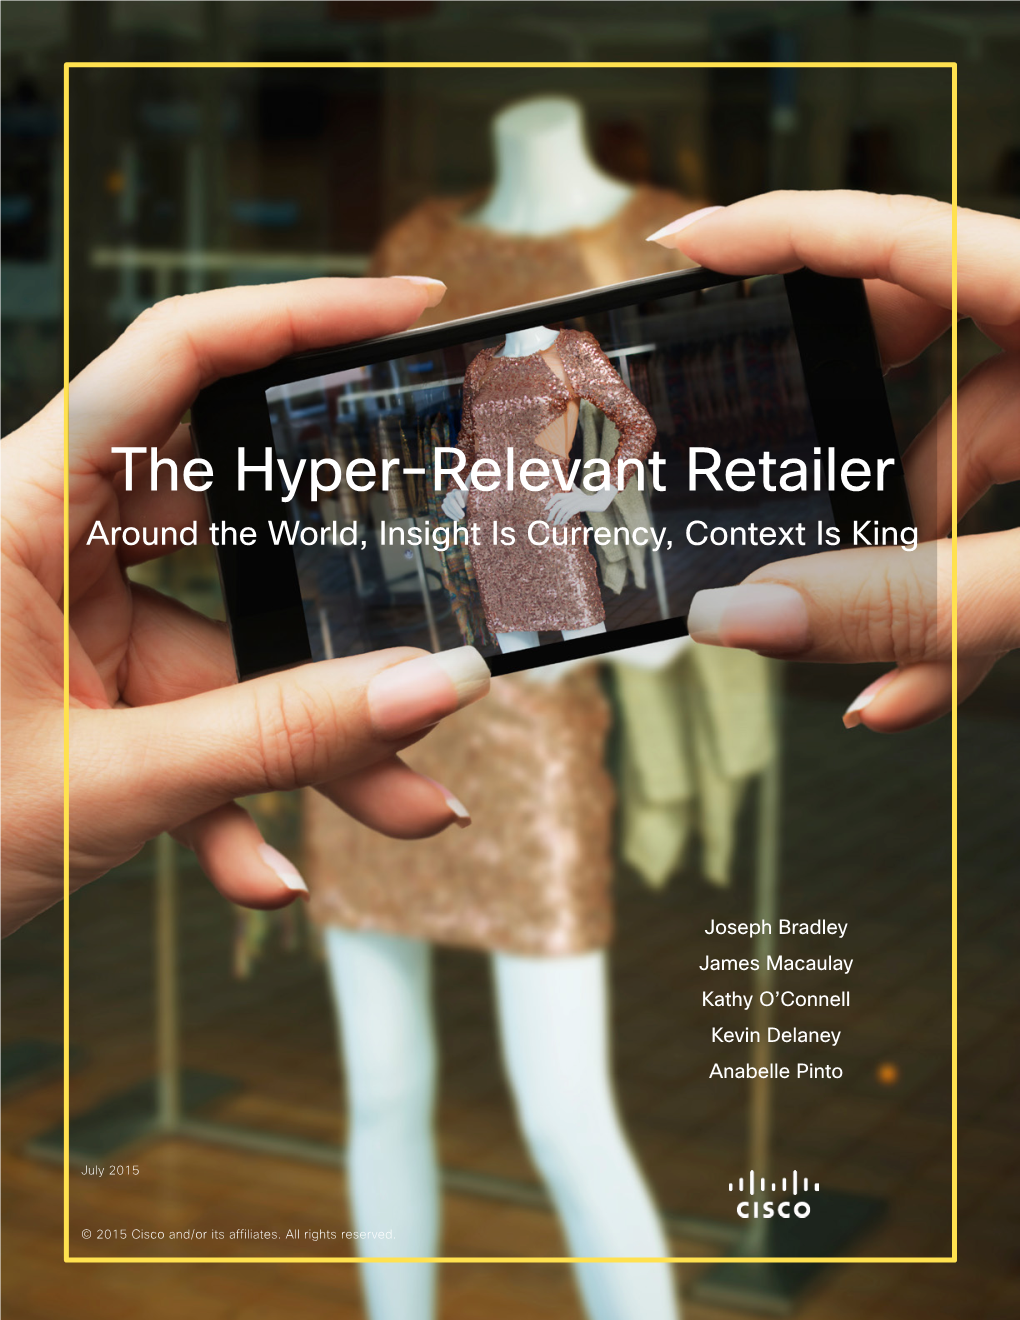 The Hyper-Relevant Retailer Around the World, Insight Is Currency, Context Is King